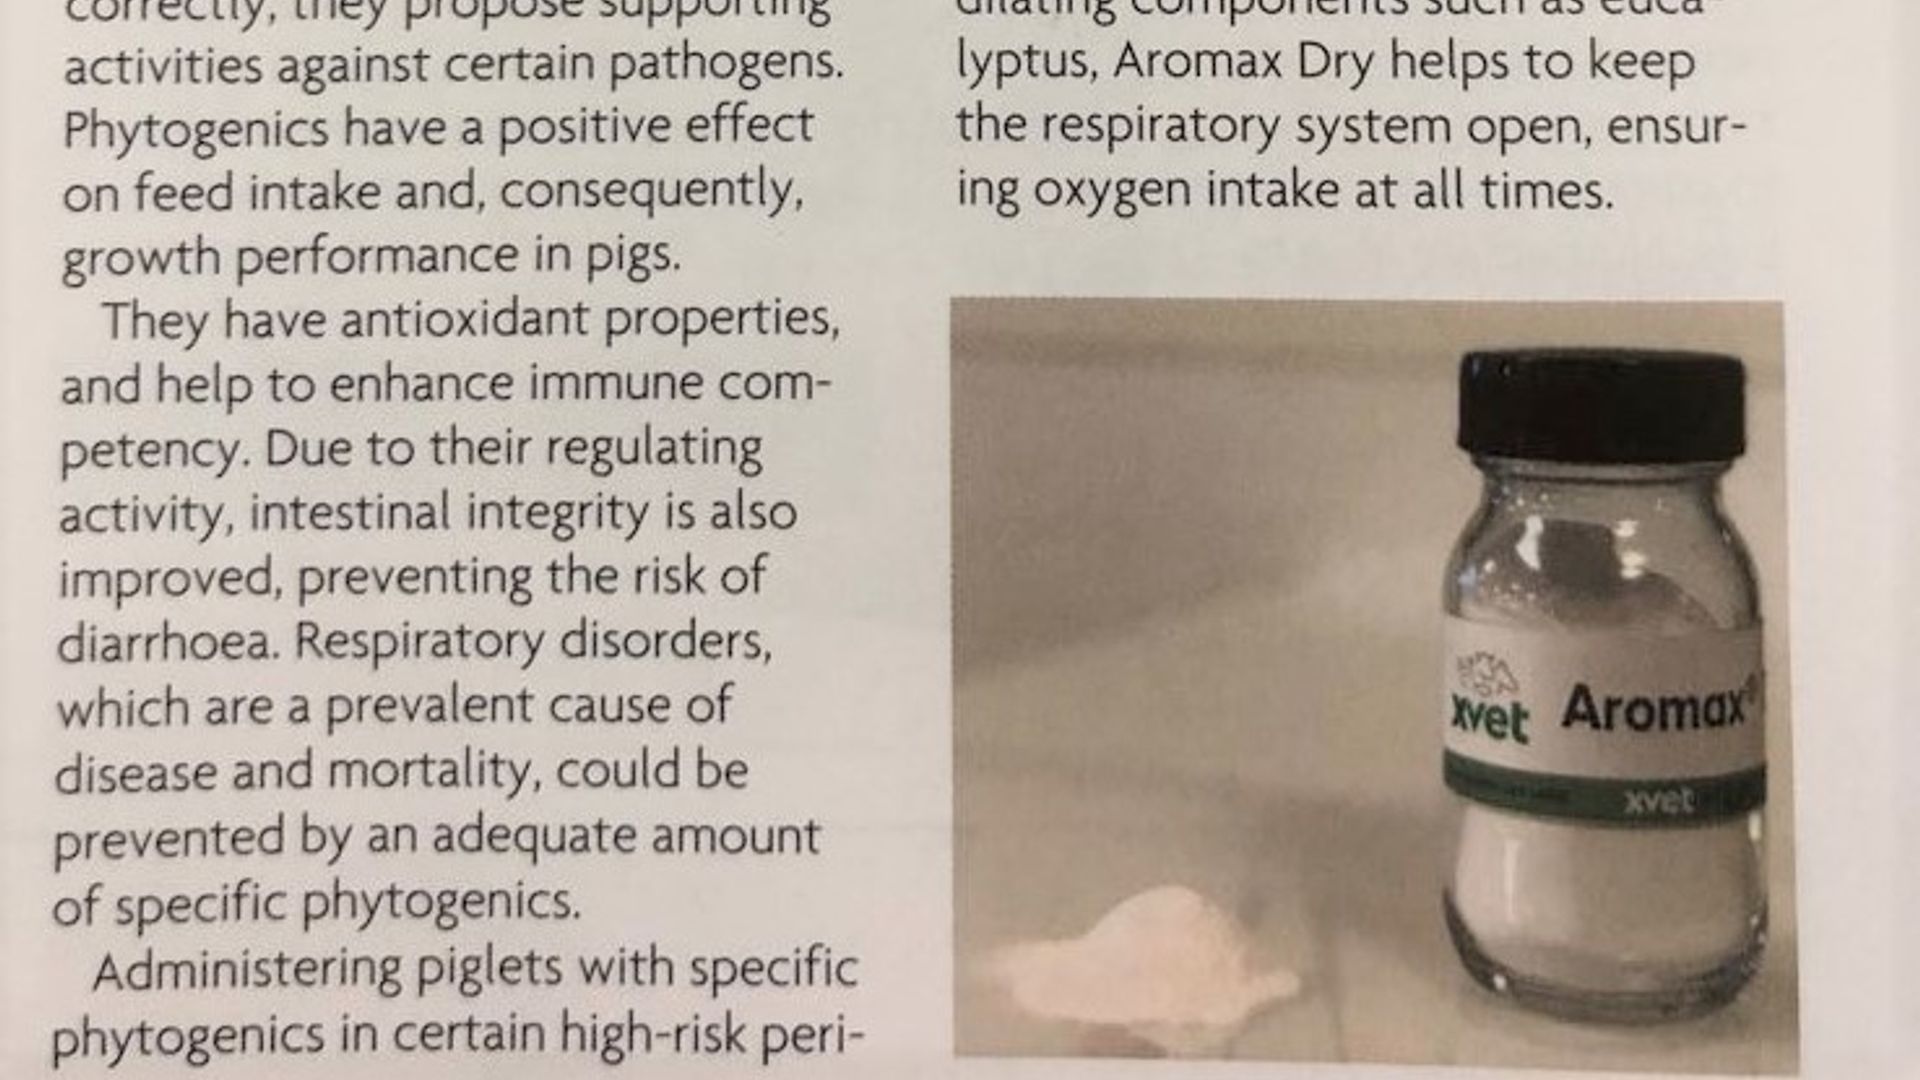 Aromax in the News